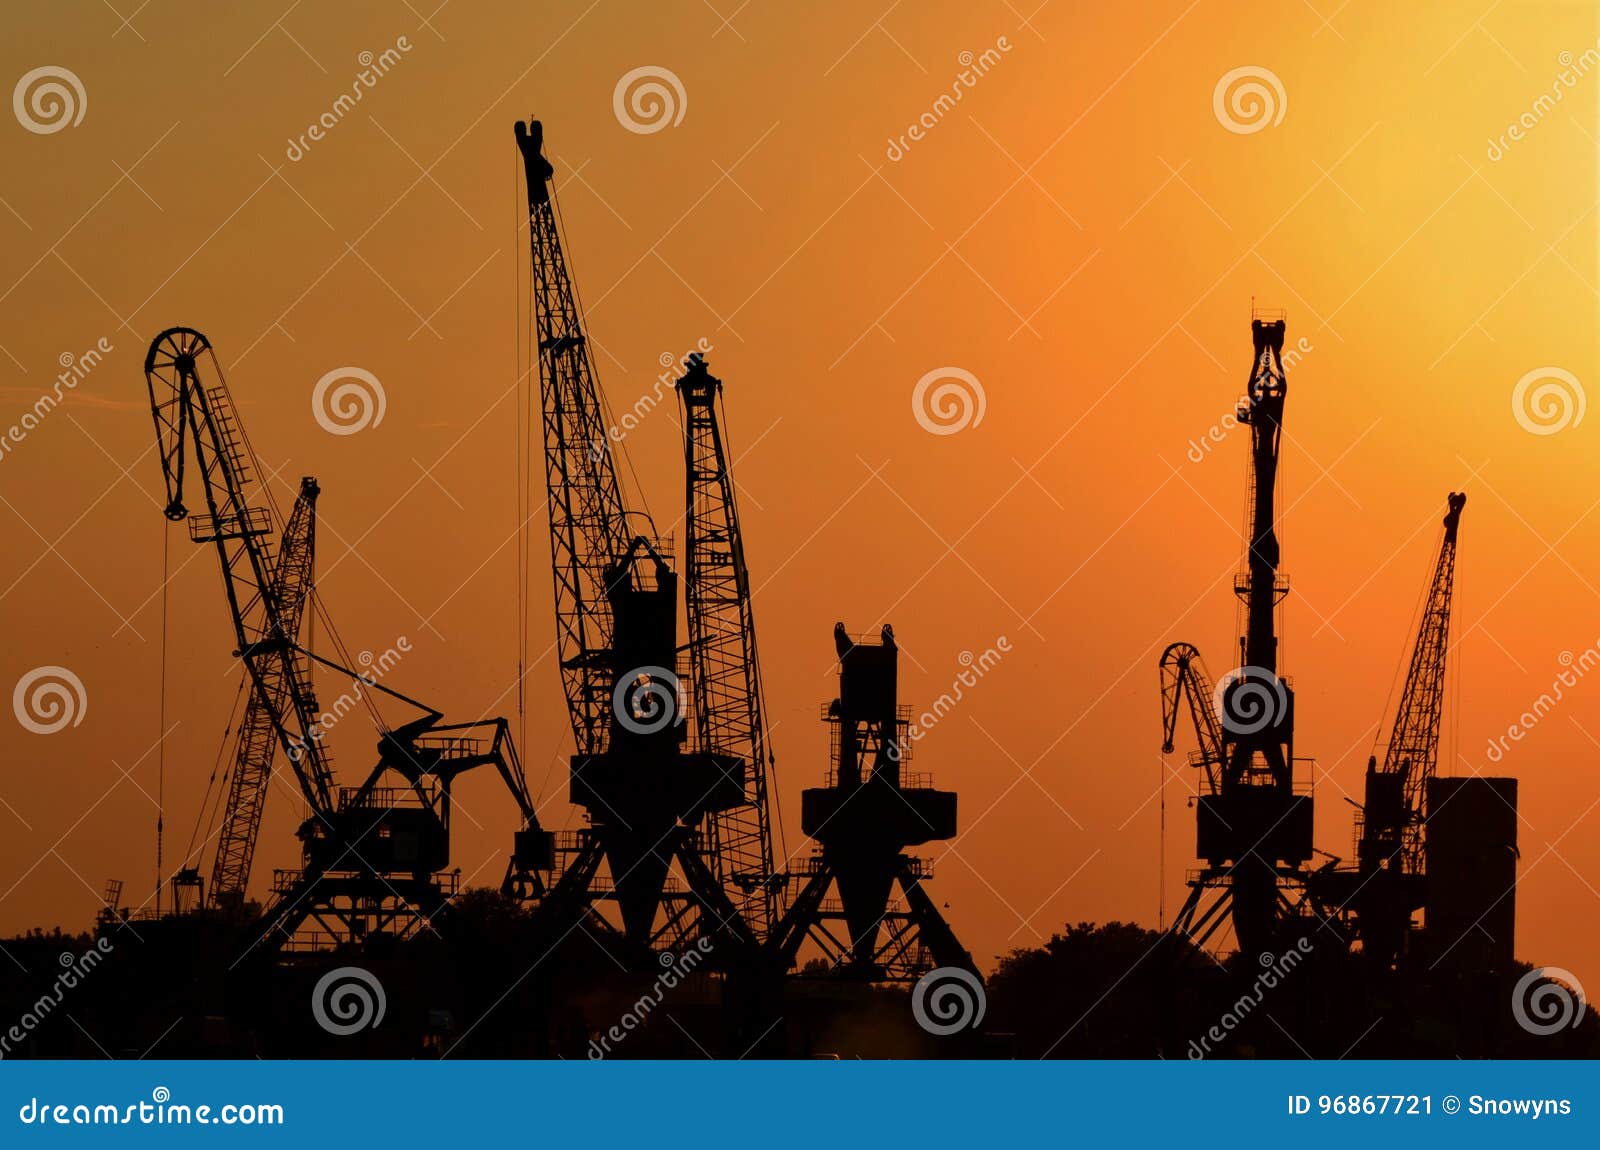 cranes for loading containers onto freighters or cargo ships in the port at sunset